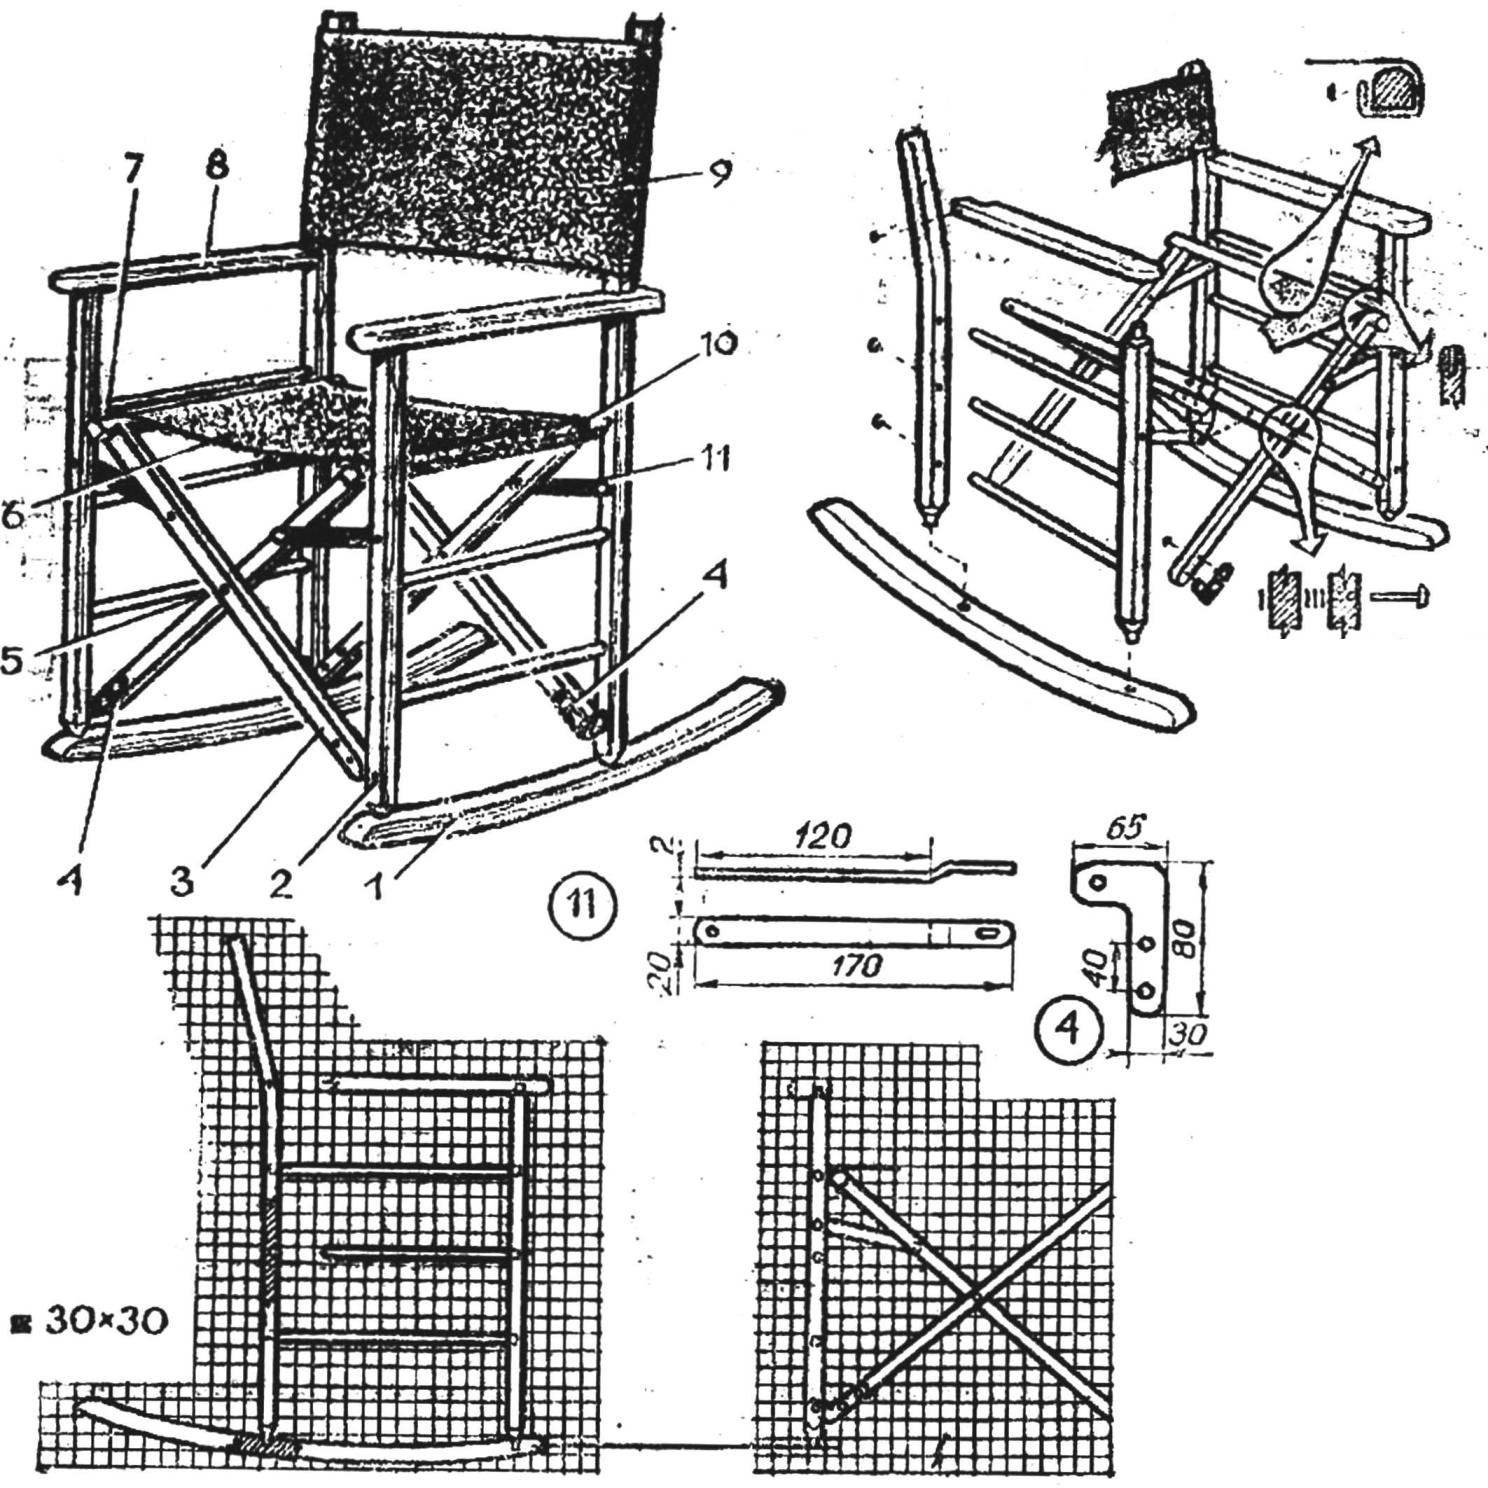 Figure 4. Foldable rocking chair